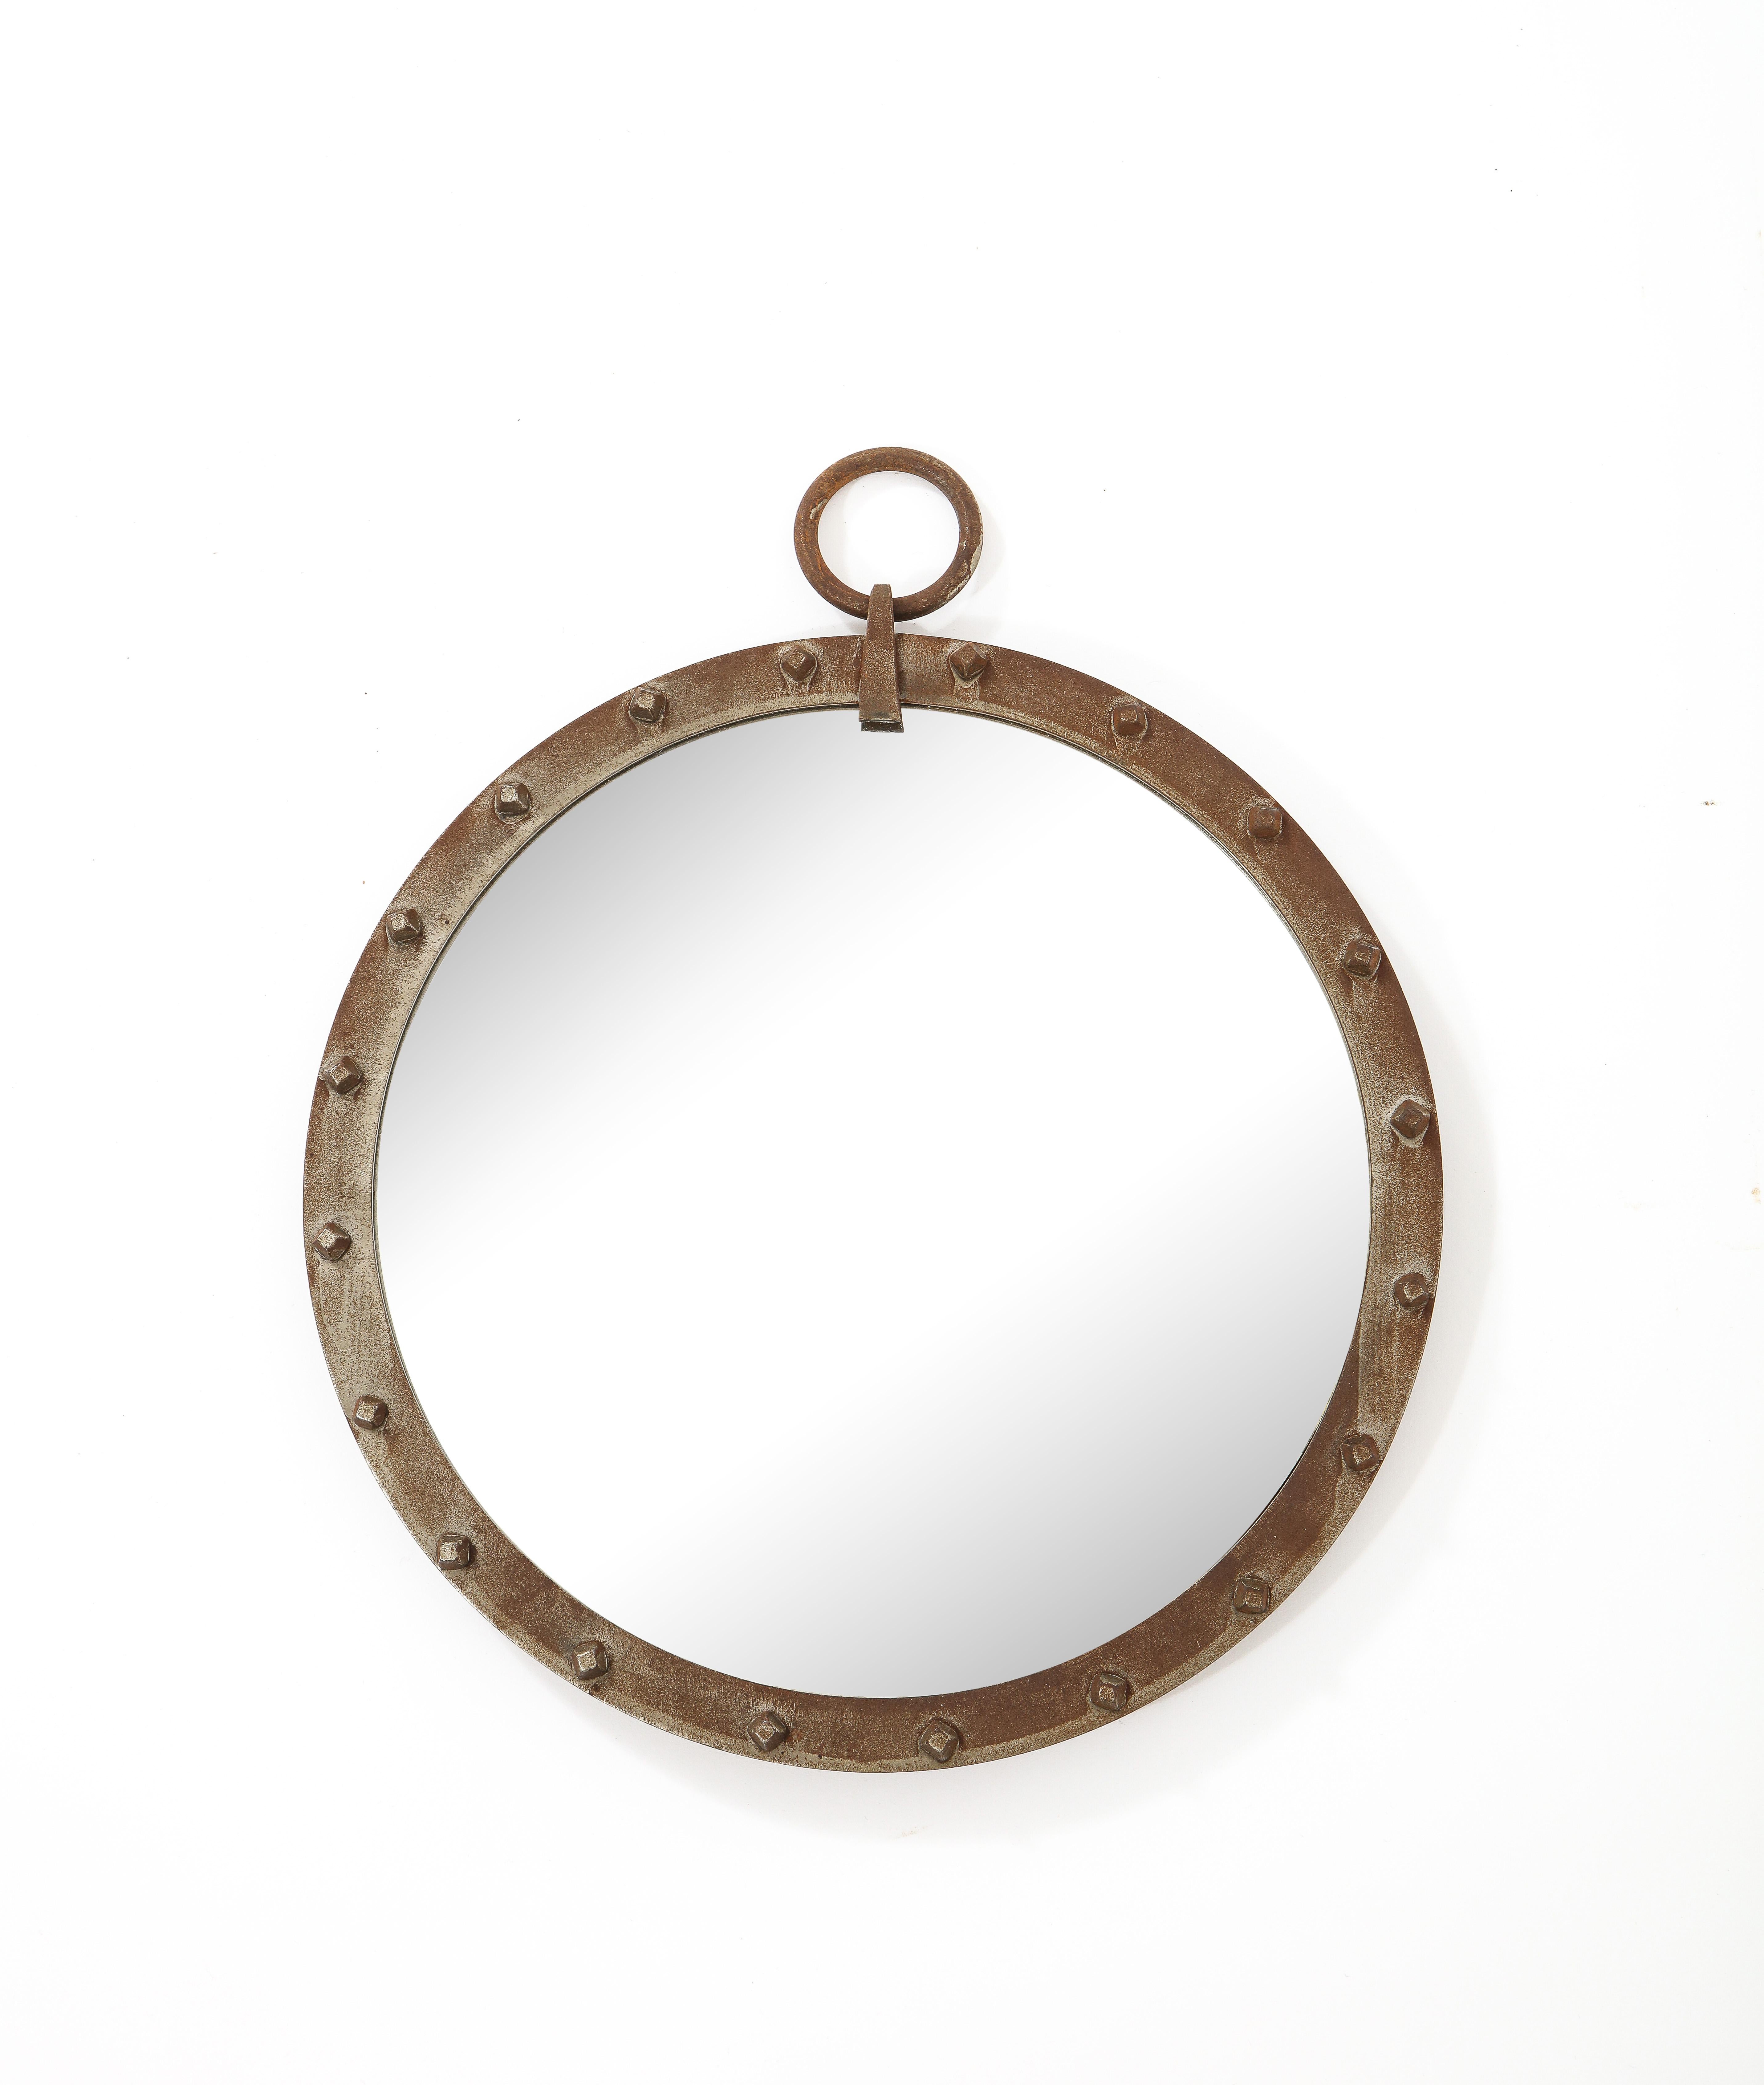 A minimal porthole mirror in a steel or wrought iron round frame hung by a ring. Cool detailing and patina.